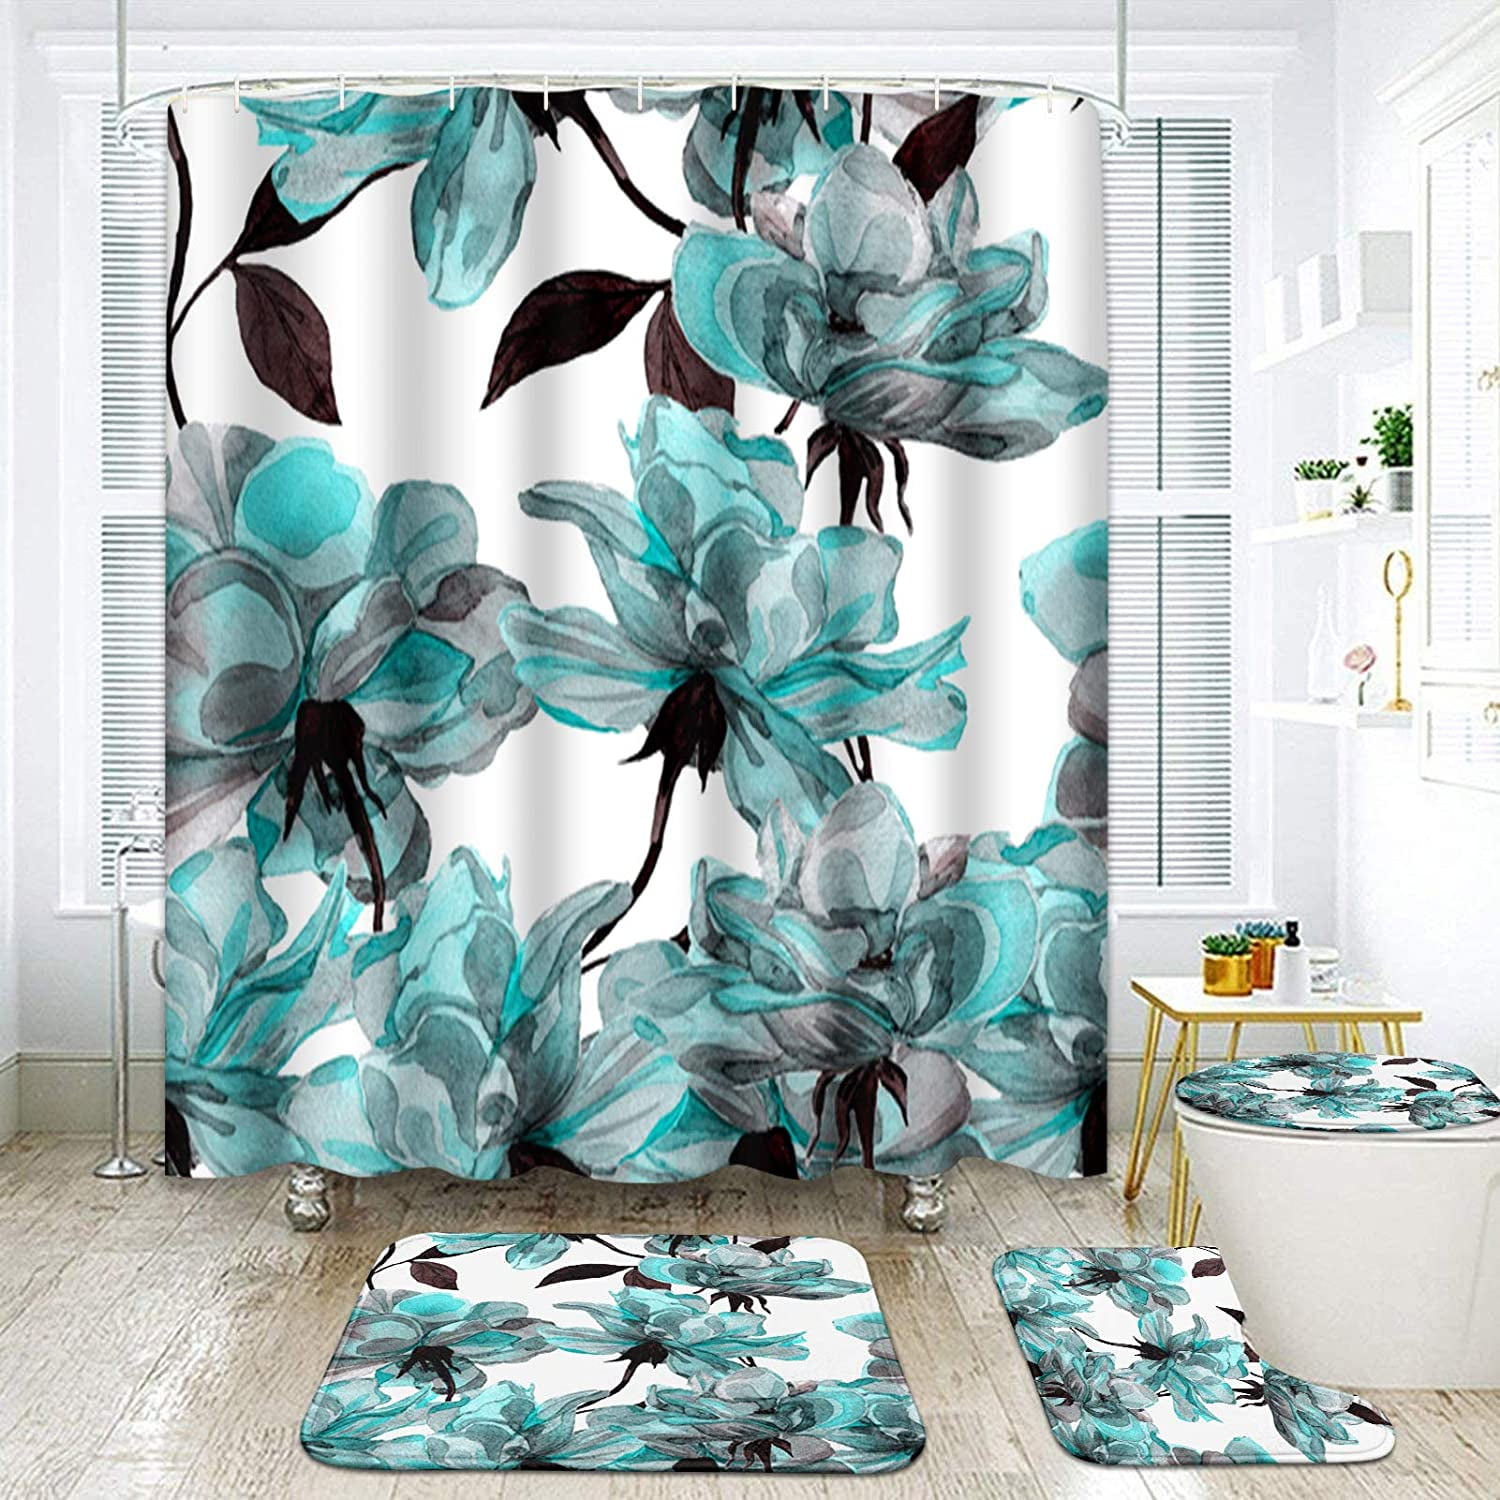 Details about   Fish Shower Curtain Watercolor Blue Patterns Print for Bathroom 